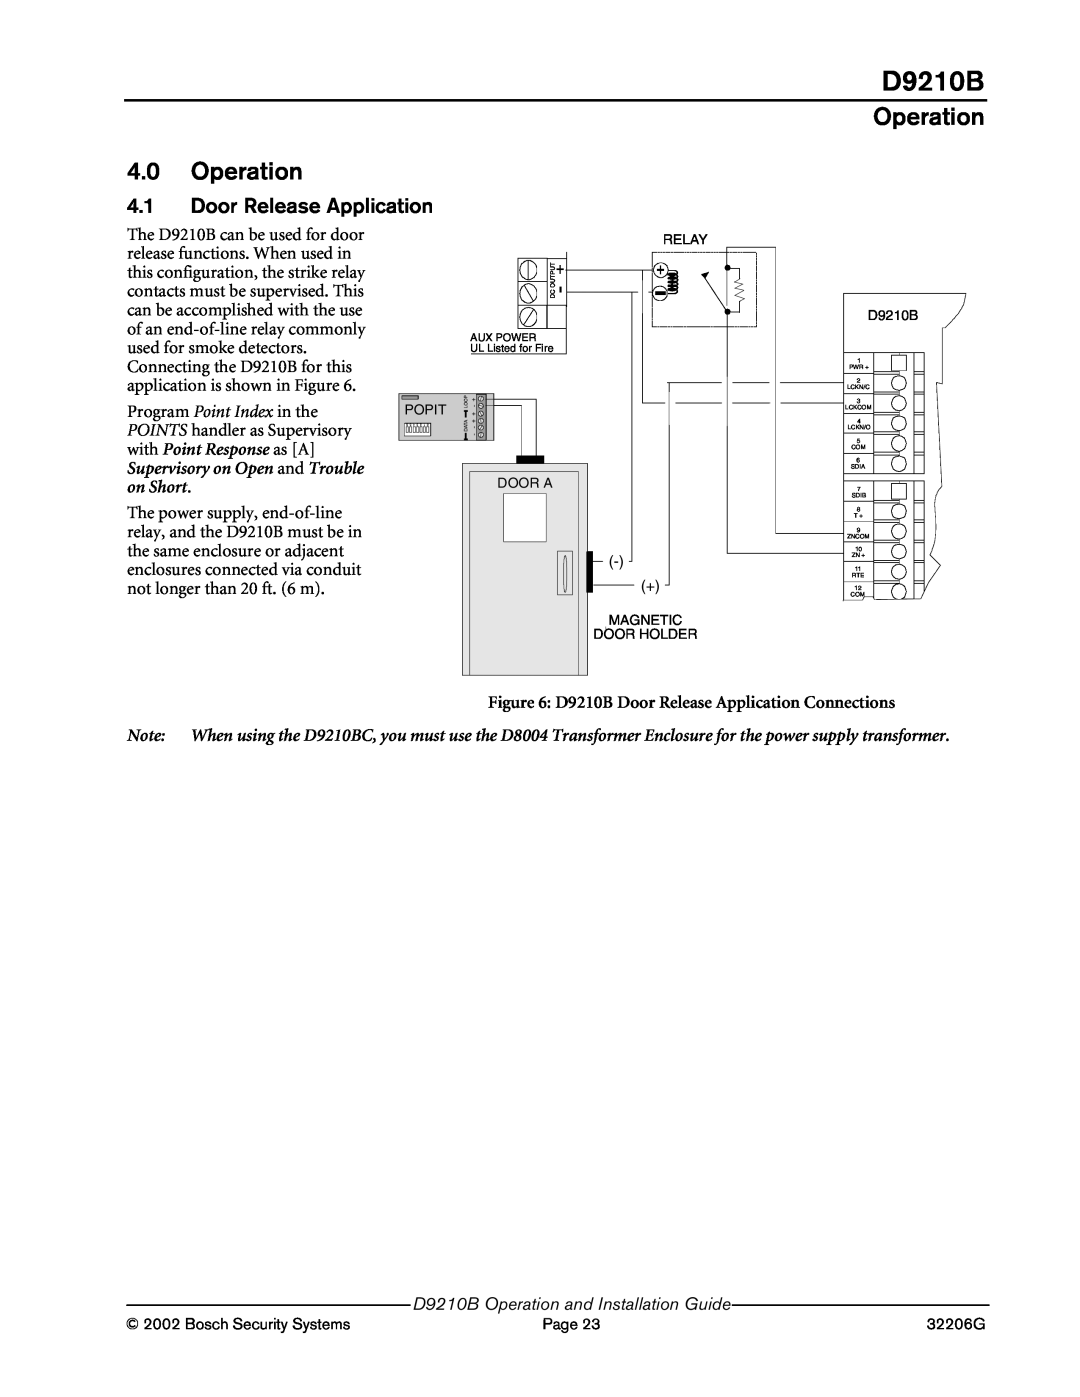 Bosch Appliances manual Operation 4.0 Operation, D9210B Door Release Application Connections 